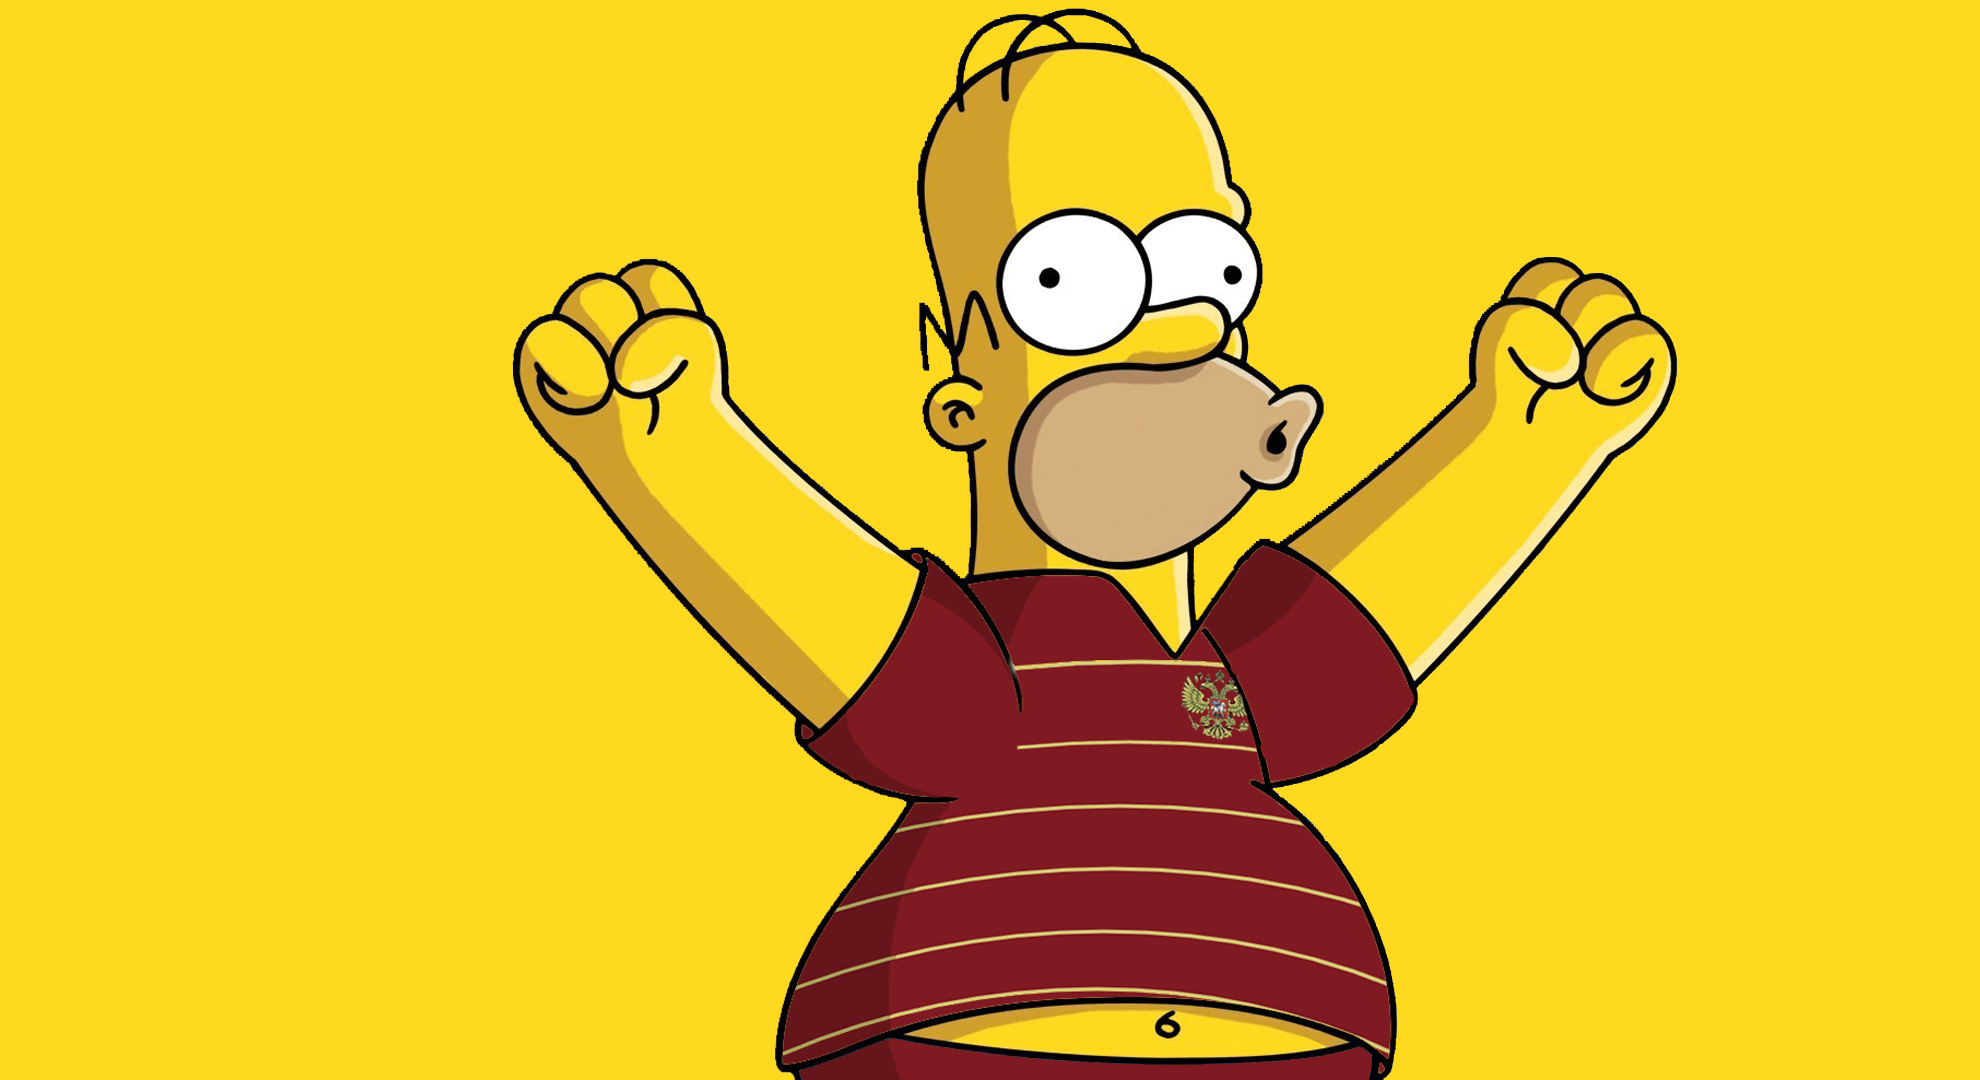 15 Best The Simpsons Wallpapers In 4K And HD Free Download